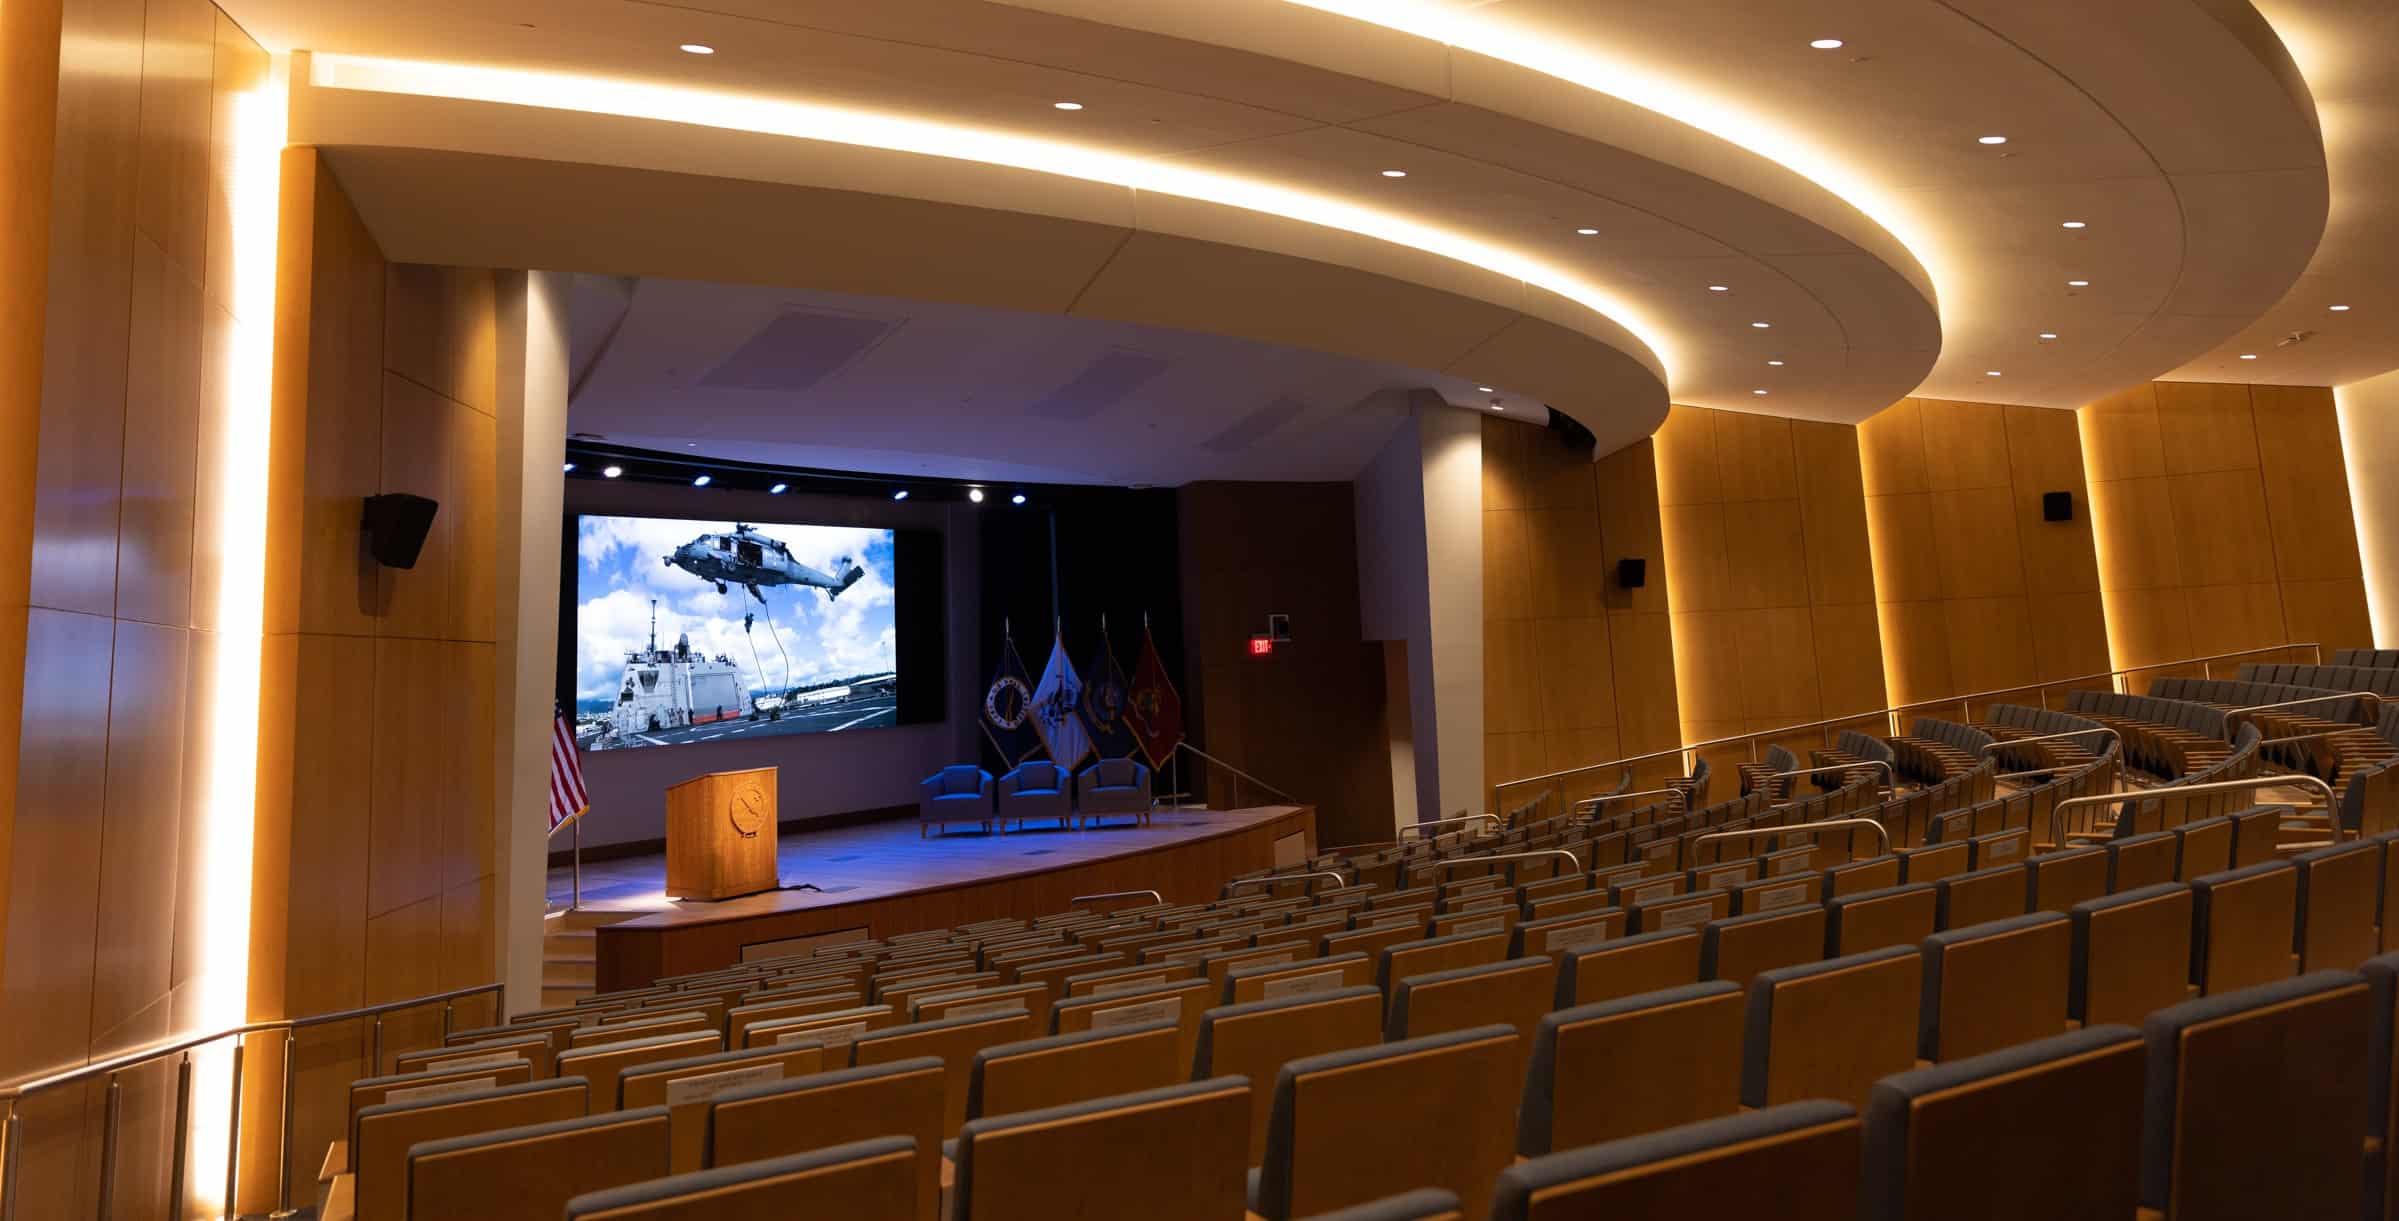 The U.S. Naval Institute deploys secure meeting spaces with AVI-SPL